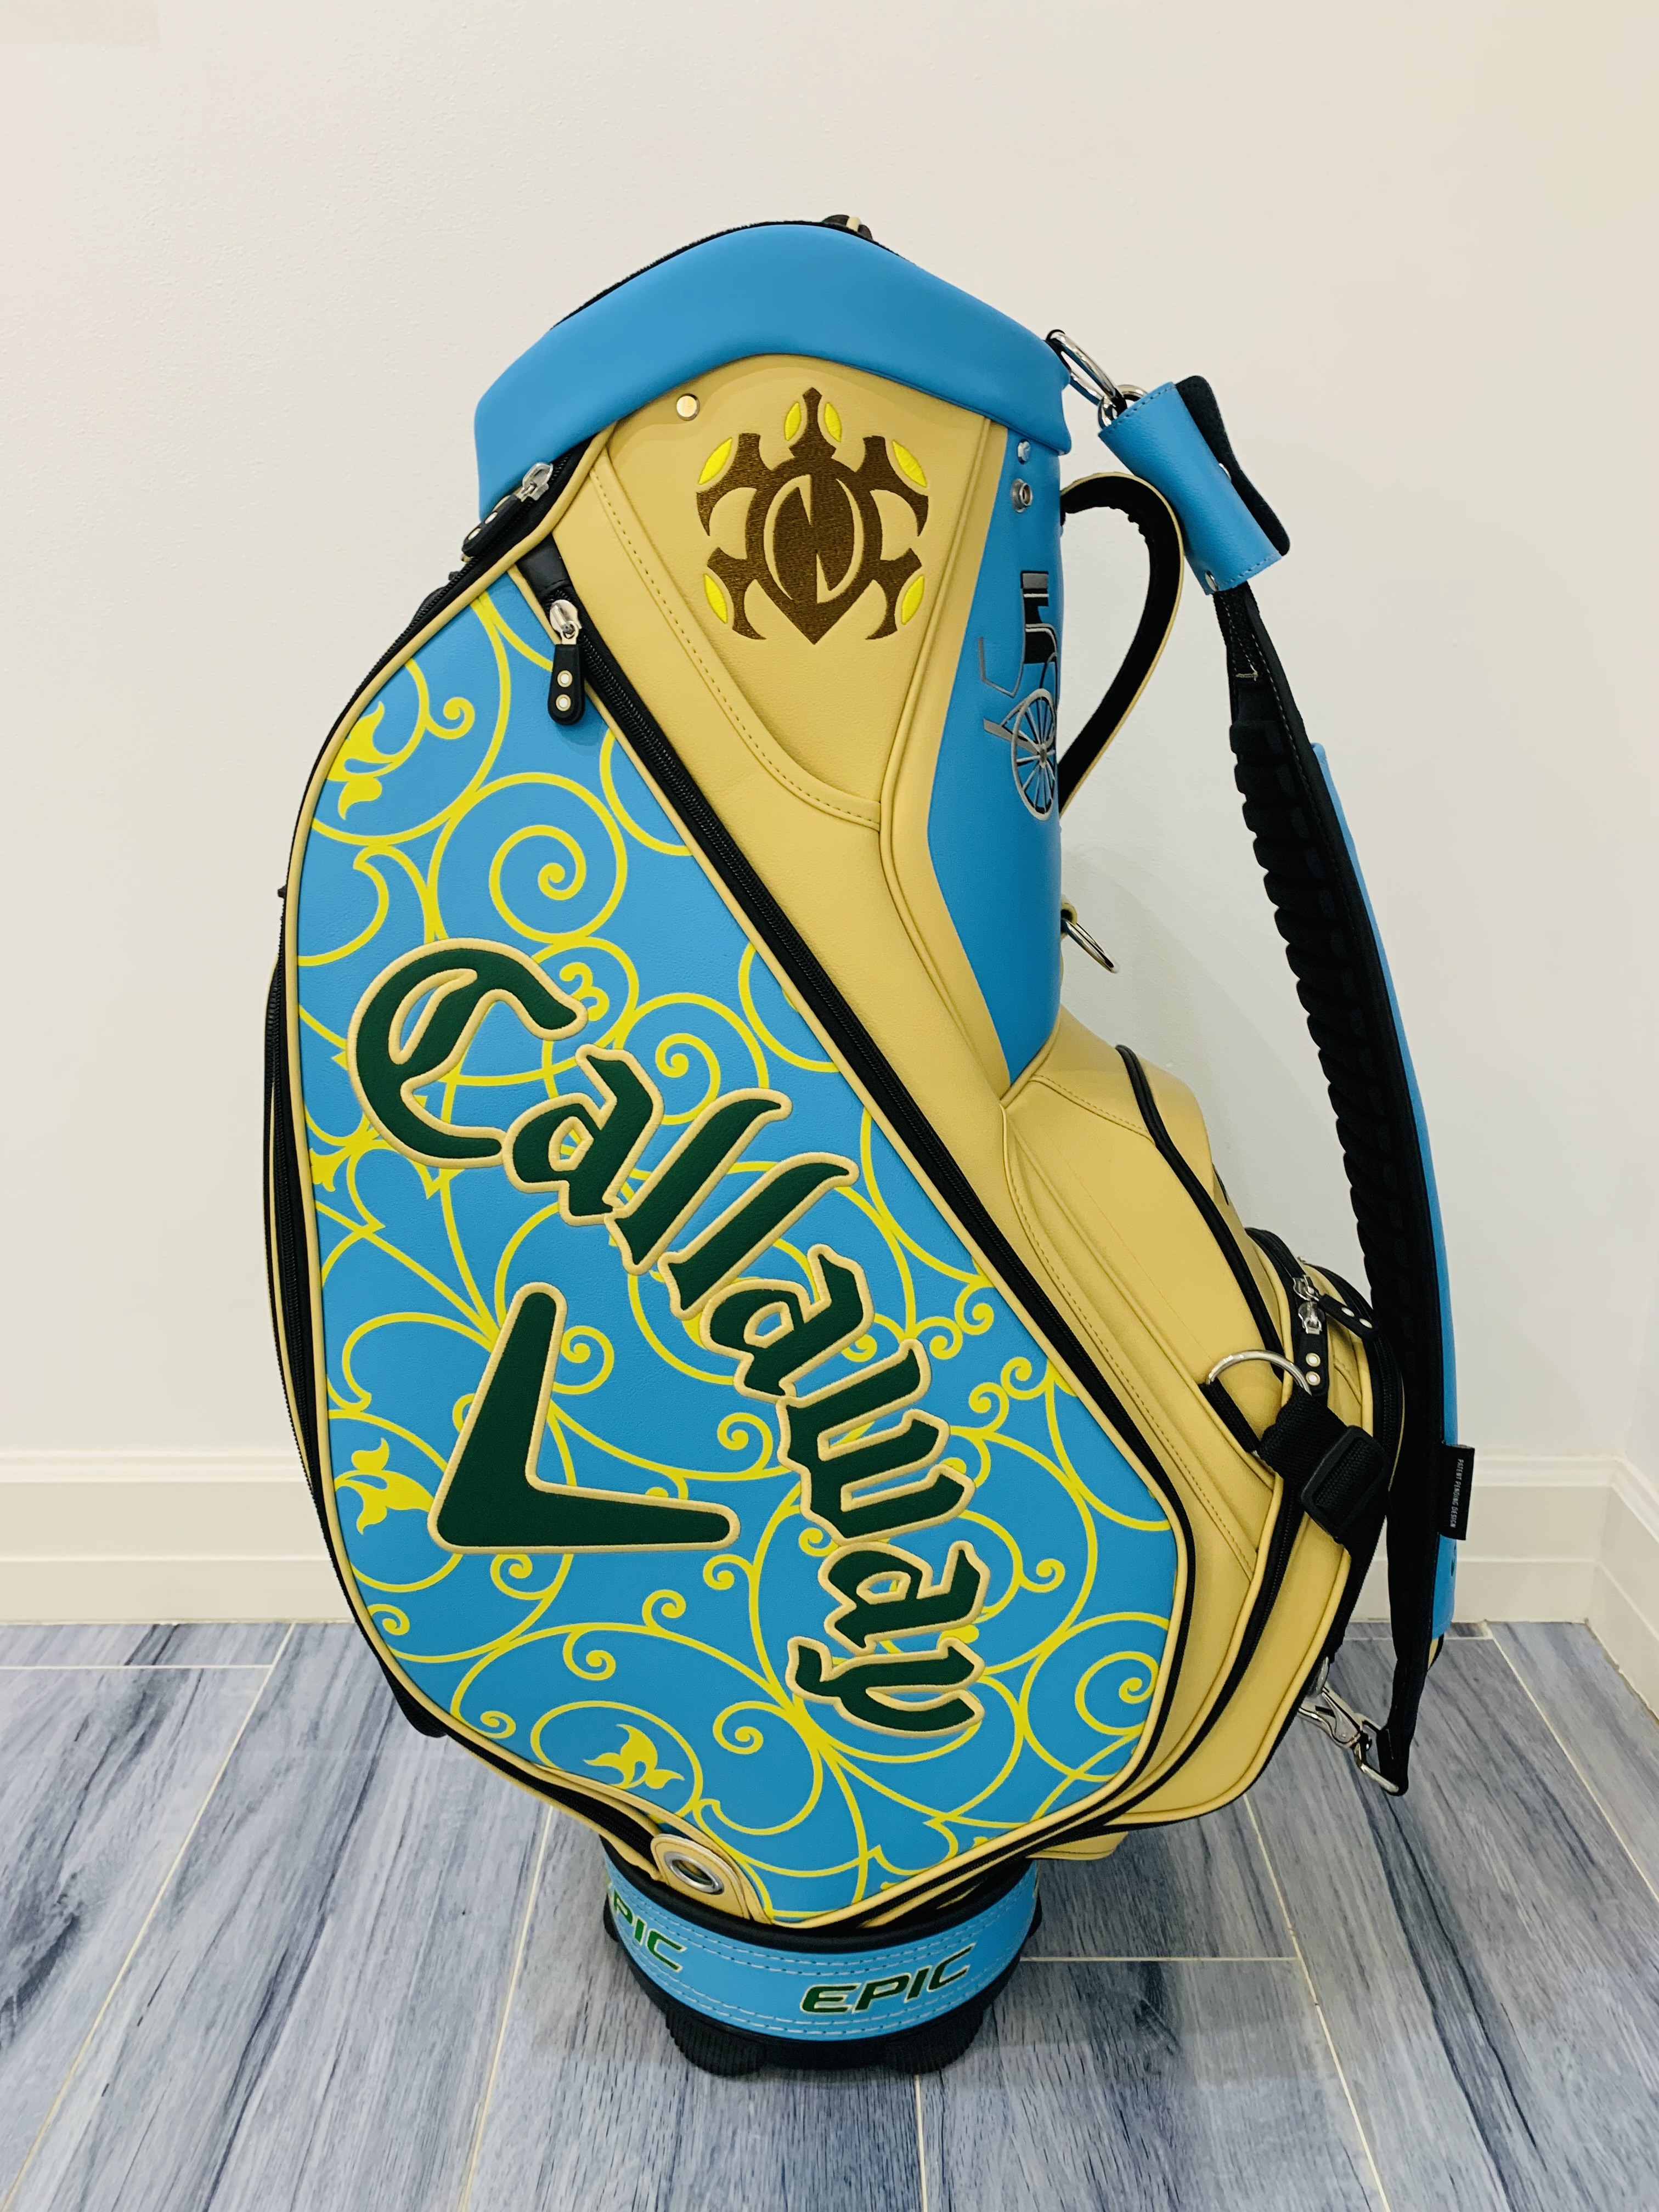 Callaway limited edition pro golf bag - new